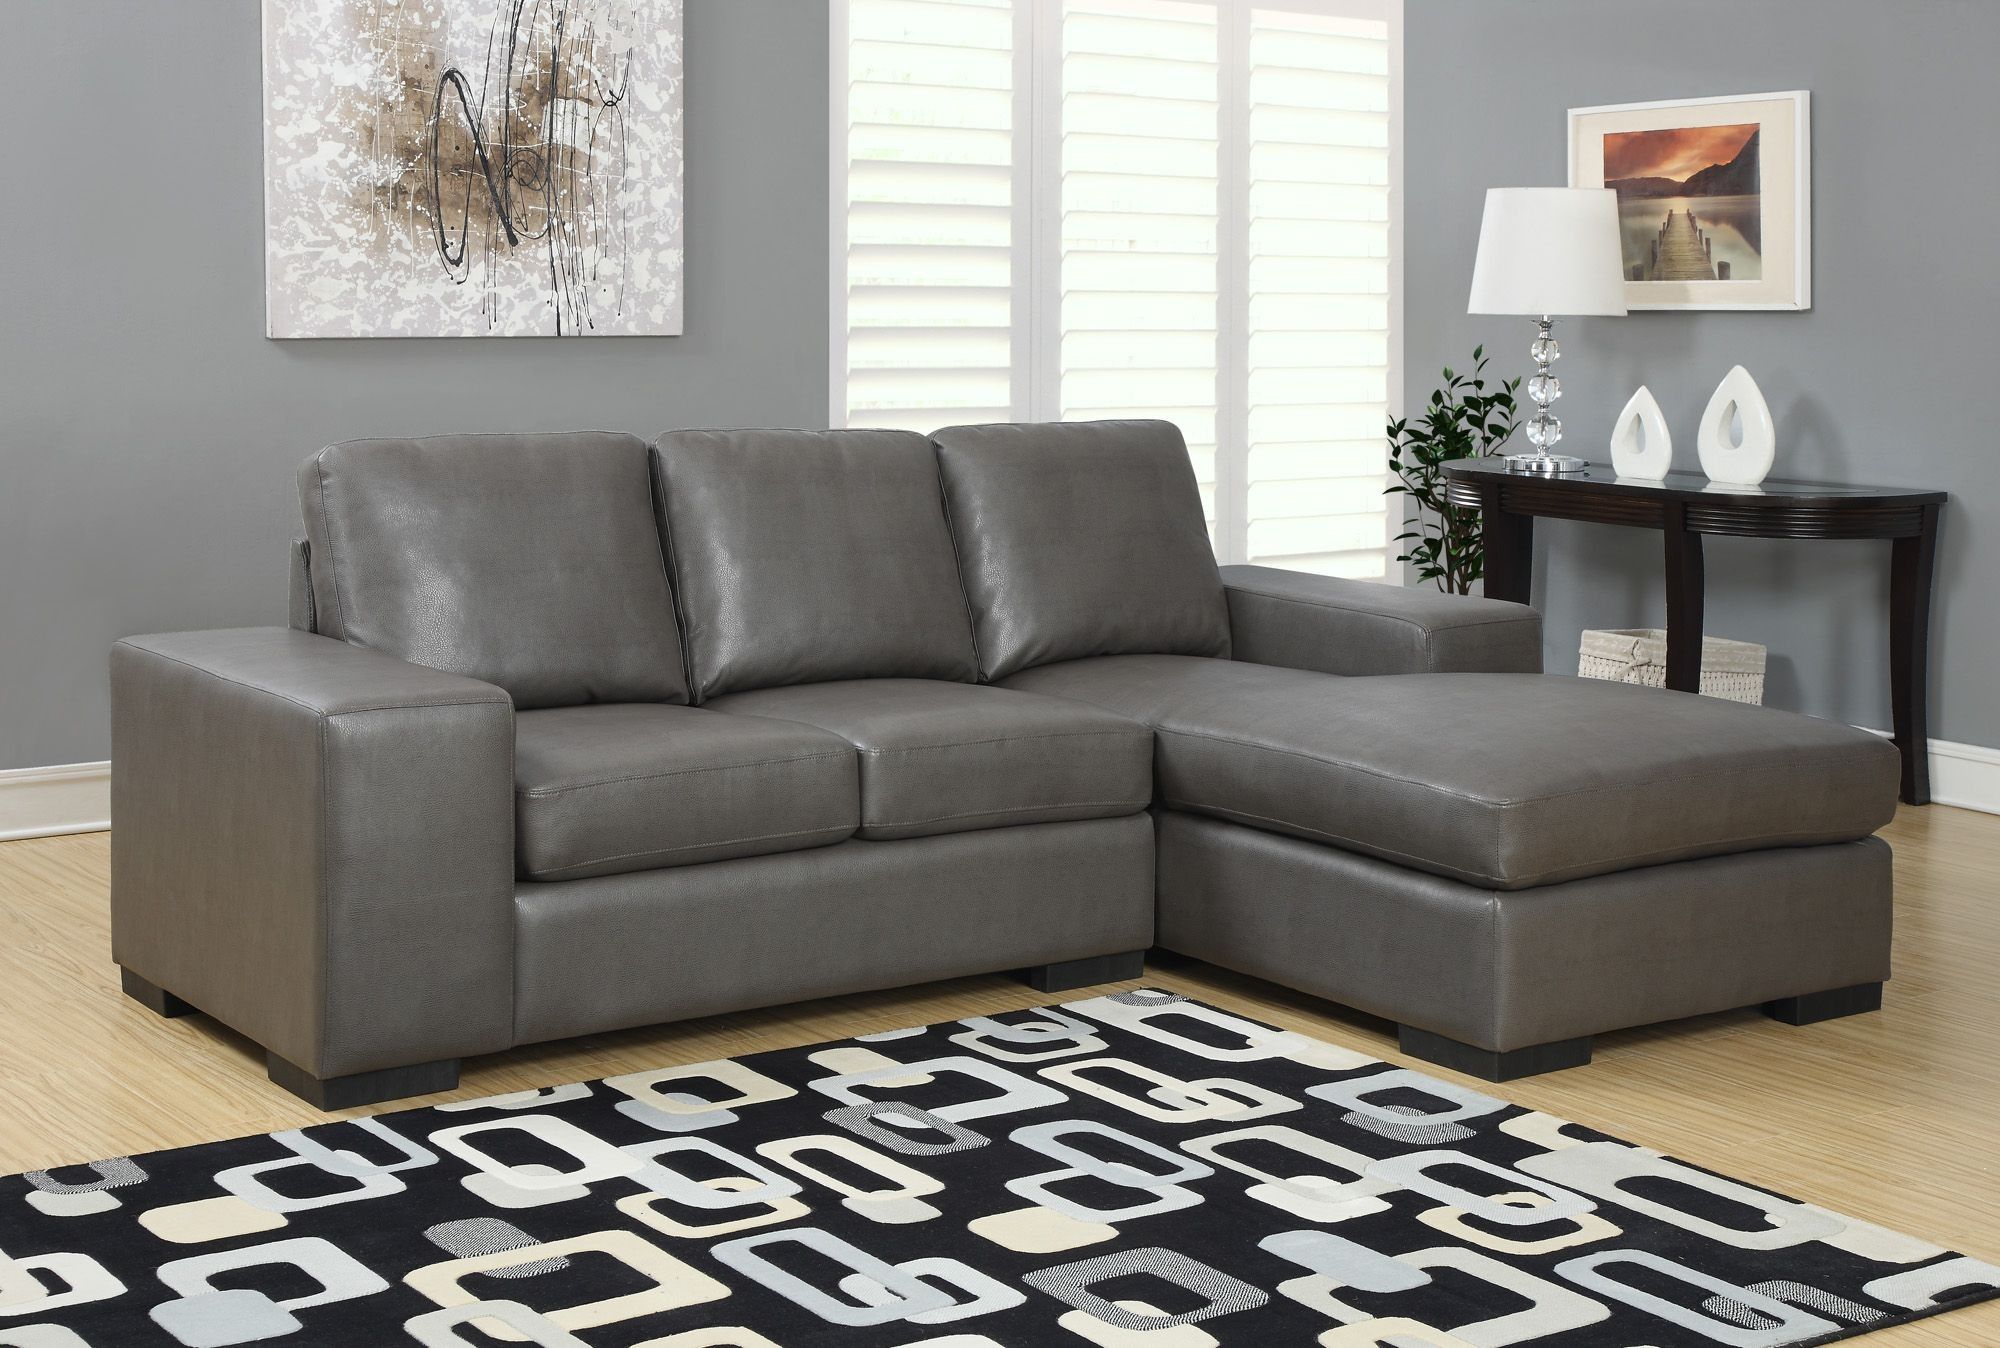 Charcoal Gray Bonded Leather/Match Sofa Sectional From Throughout Sectional Sofas In Gray (View 7 of 15)